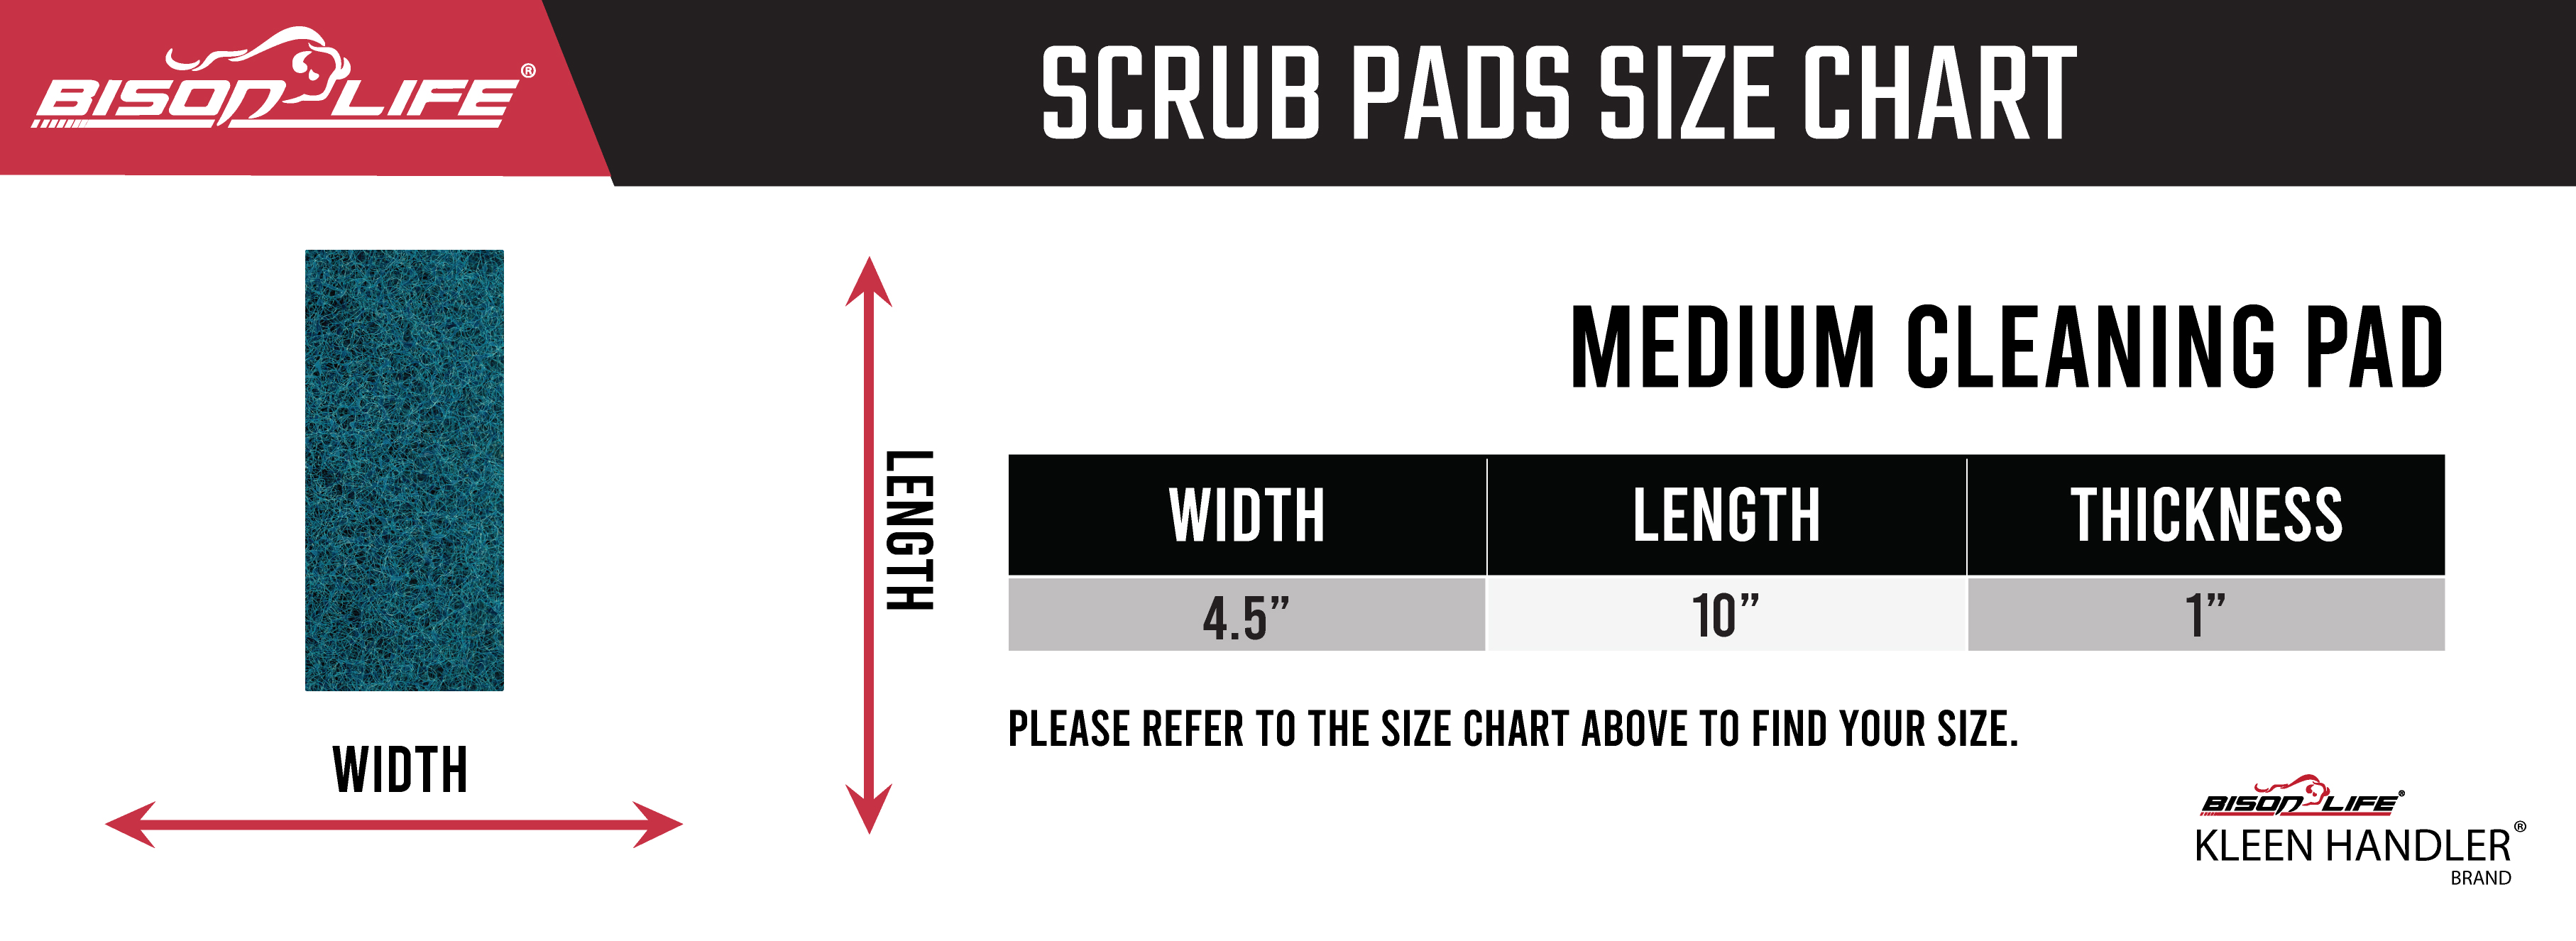 Medium Cleaning Pad Size Chart